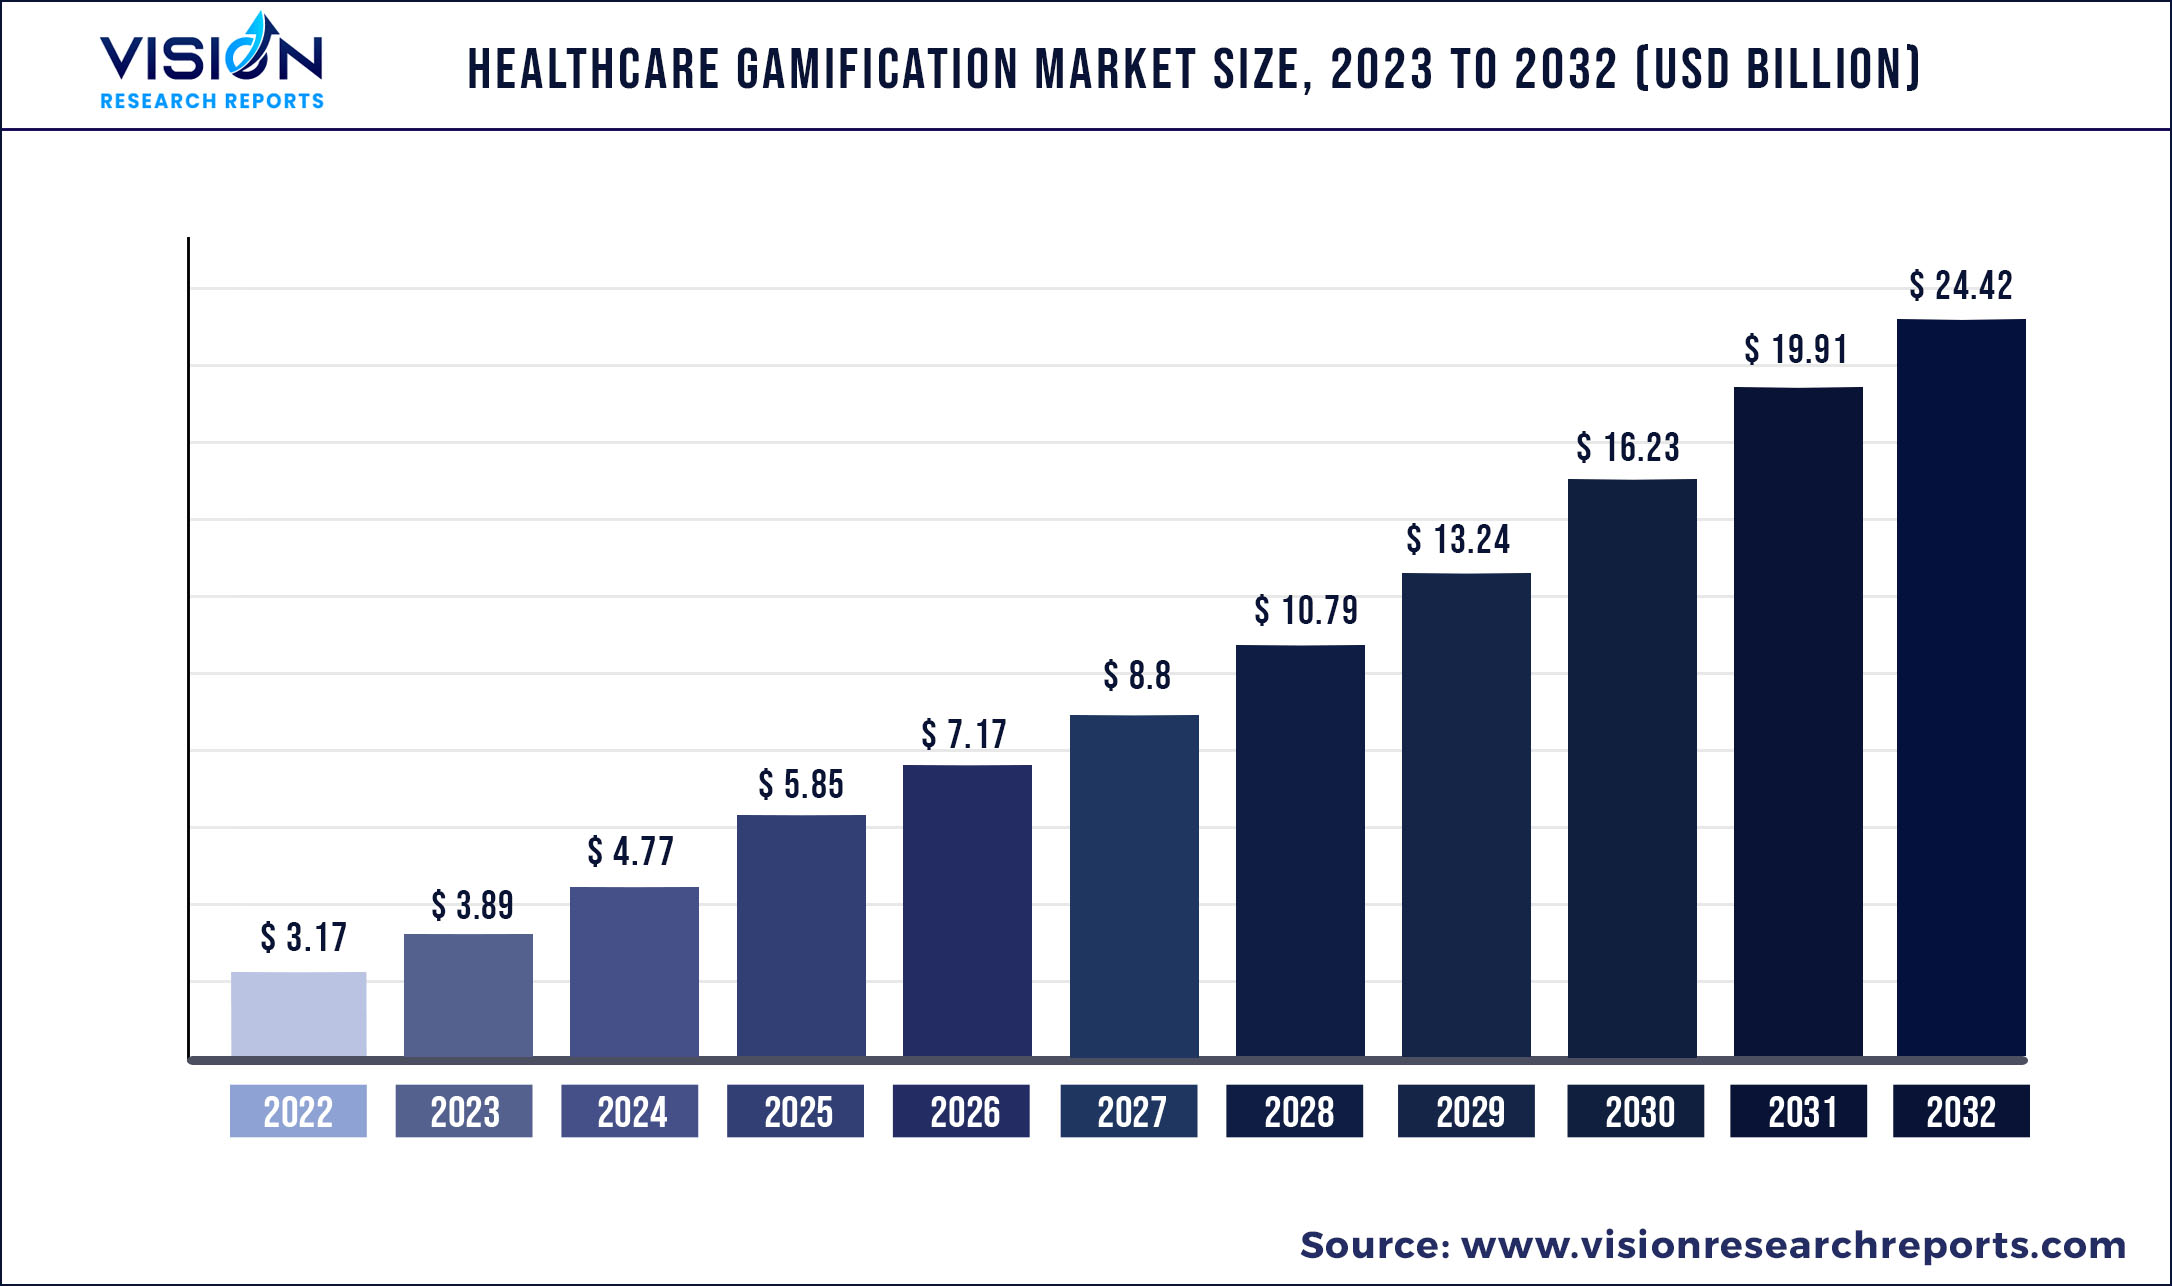 Healthcare Gamification Market Size 2023 to 2032